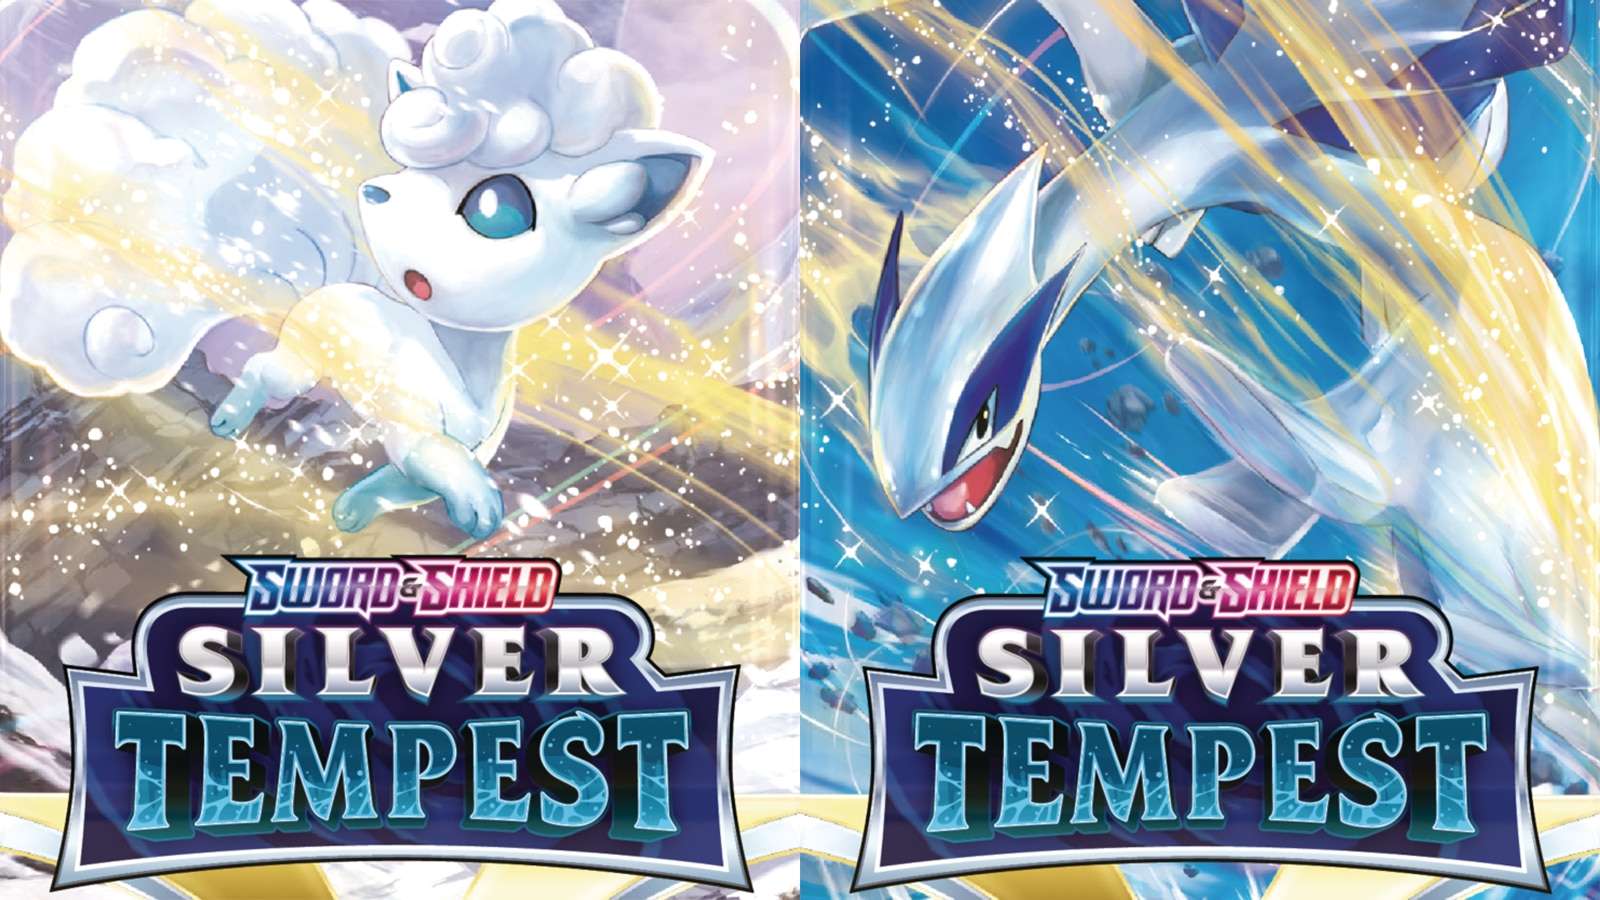 Artwork from the Pokemon TCG Silver Tempest cards